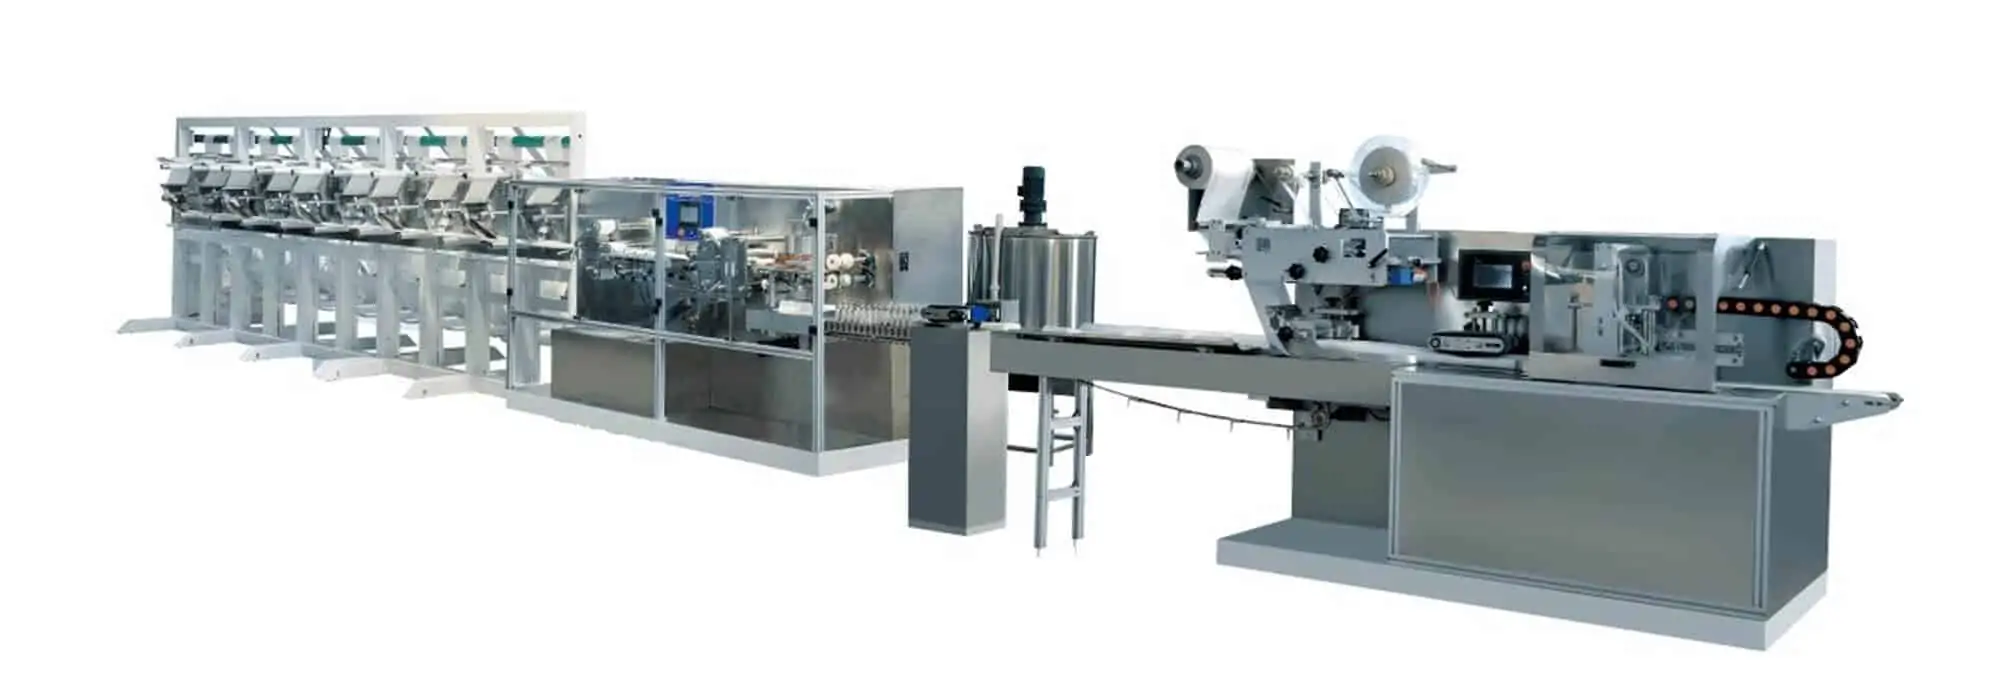 DH 12F Automatic wet wipes production line 1 - Baby Wet Wipes Machine